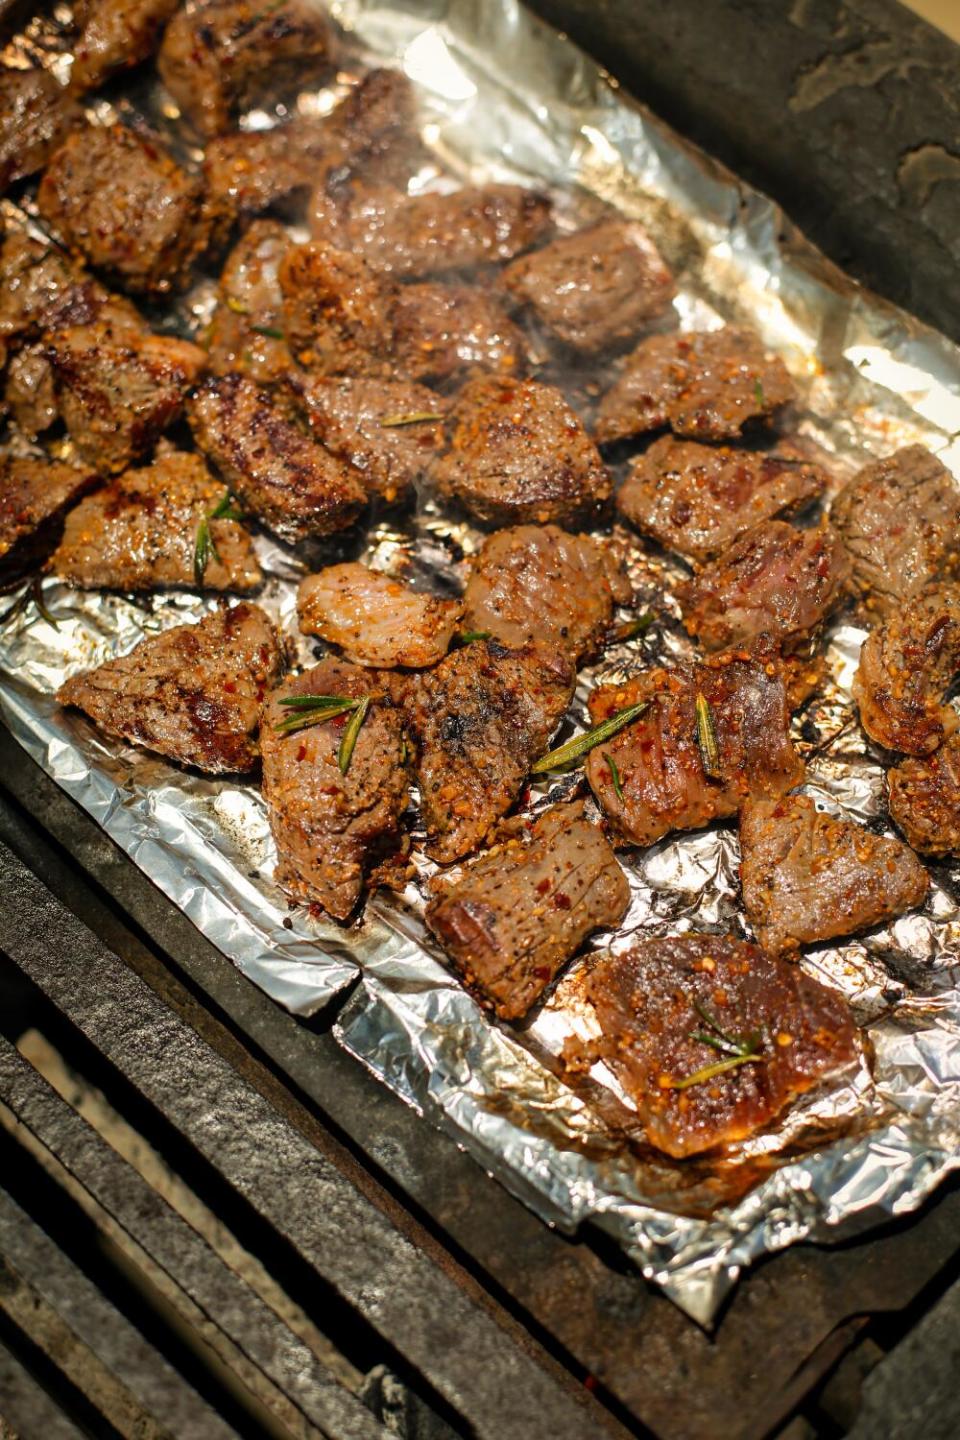 Pieces of beef being grilled on foil